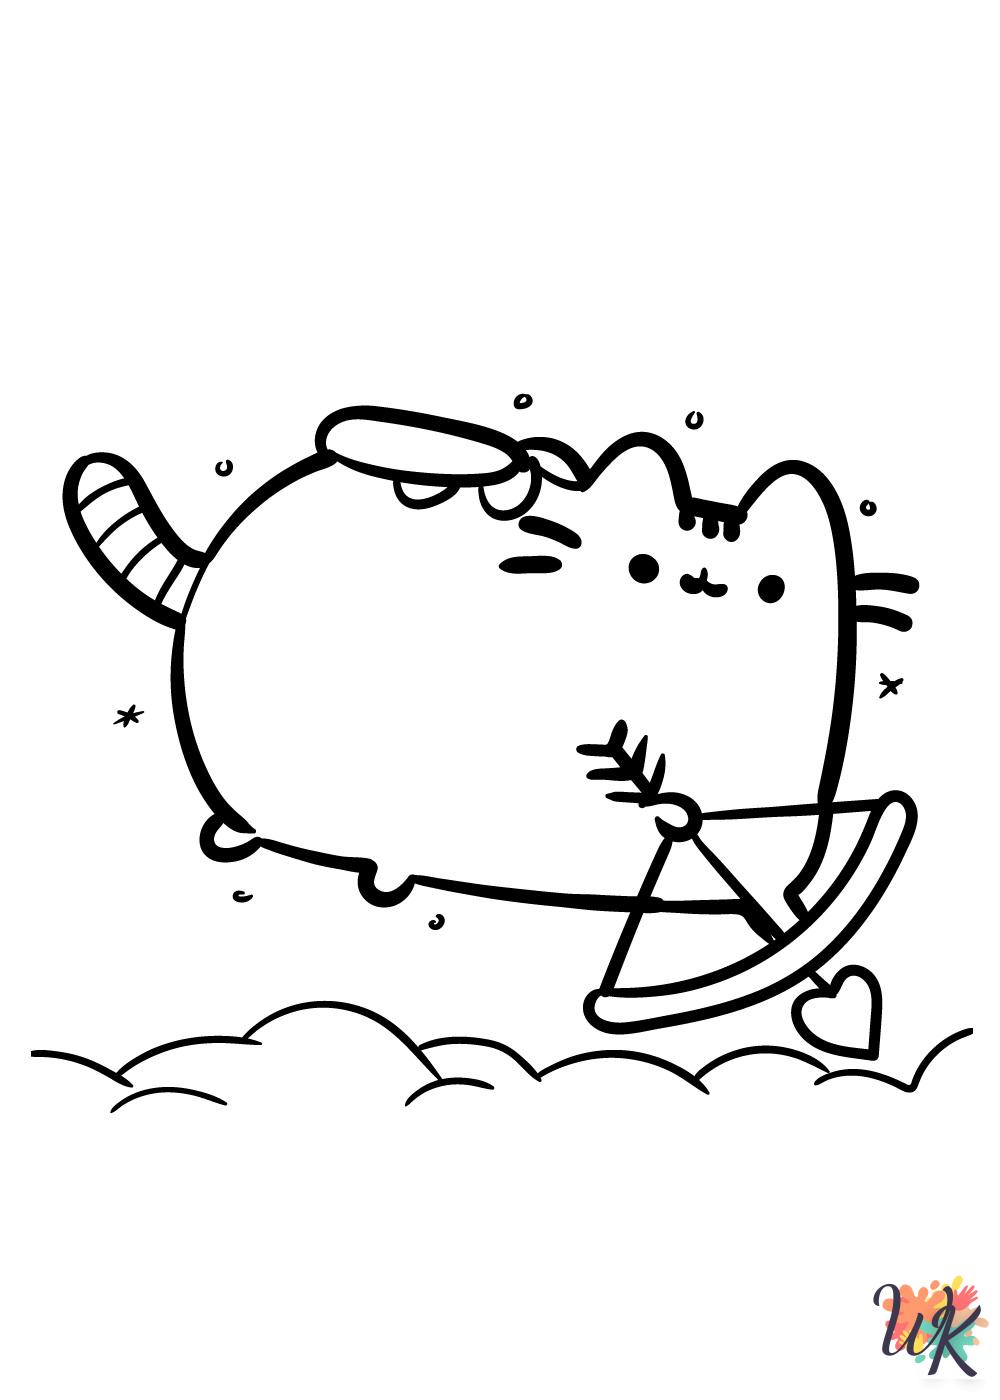 Pusheen coloring pages pdf